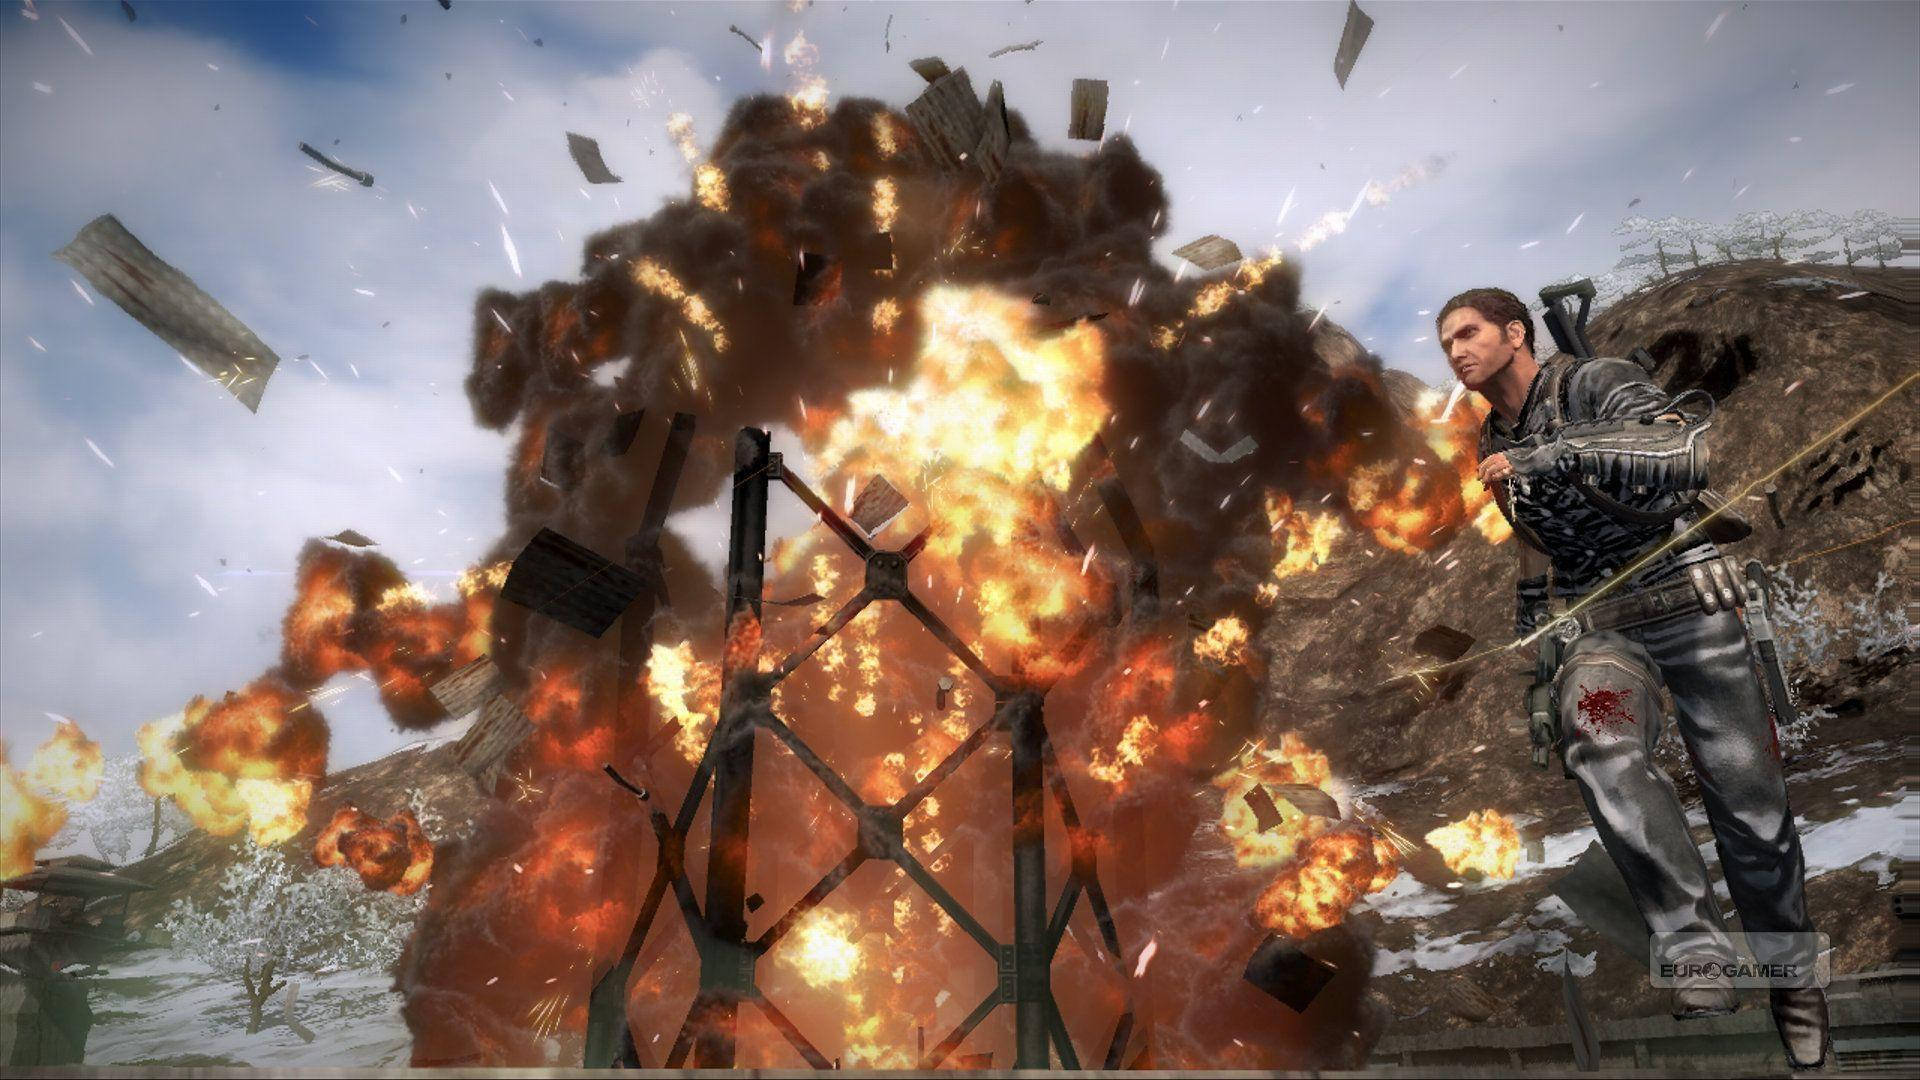 The High-stakes Action In The Stunning Just Cause 2 Game World